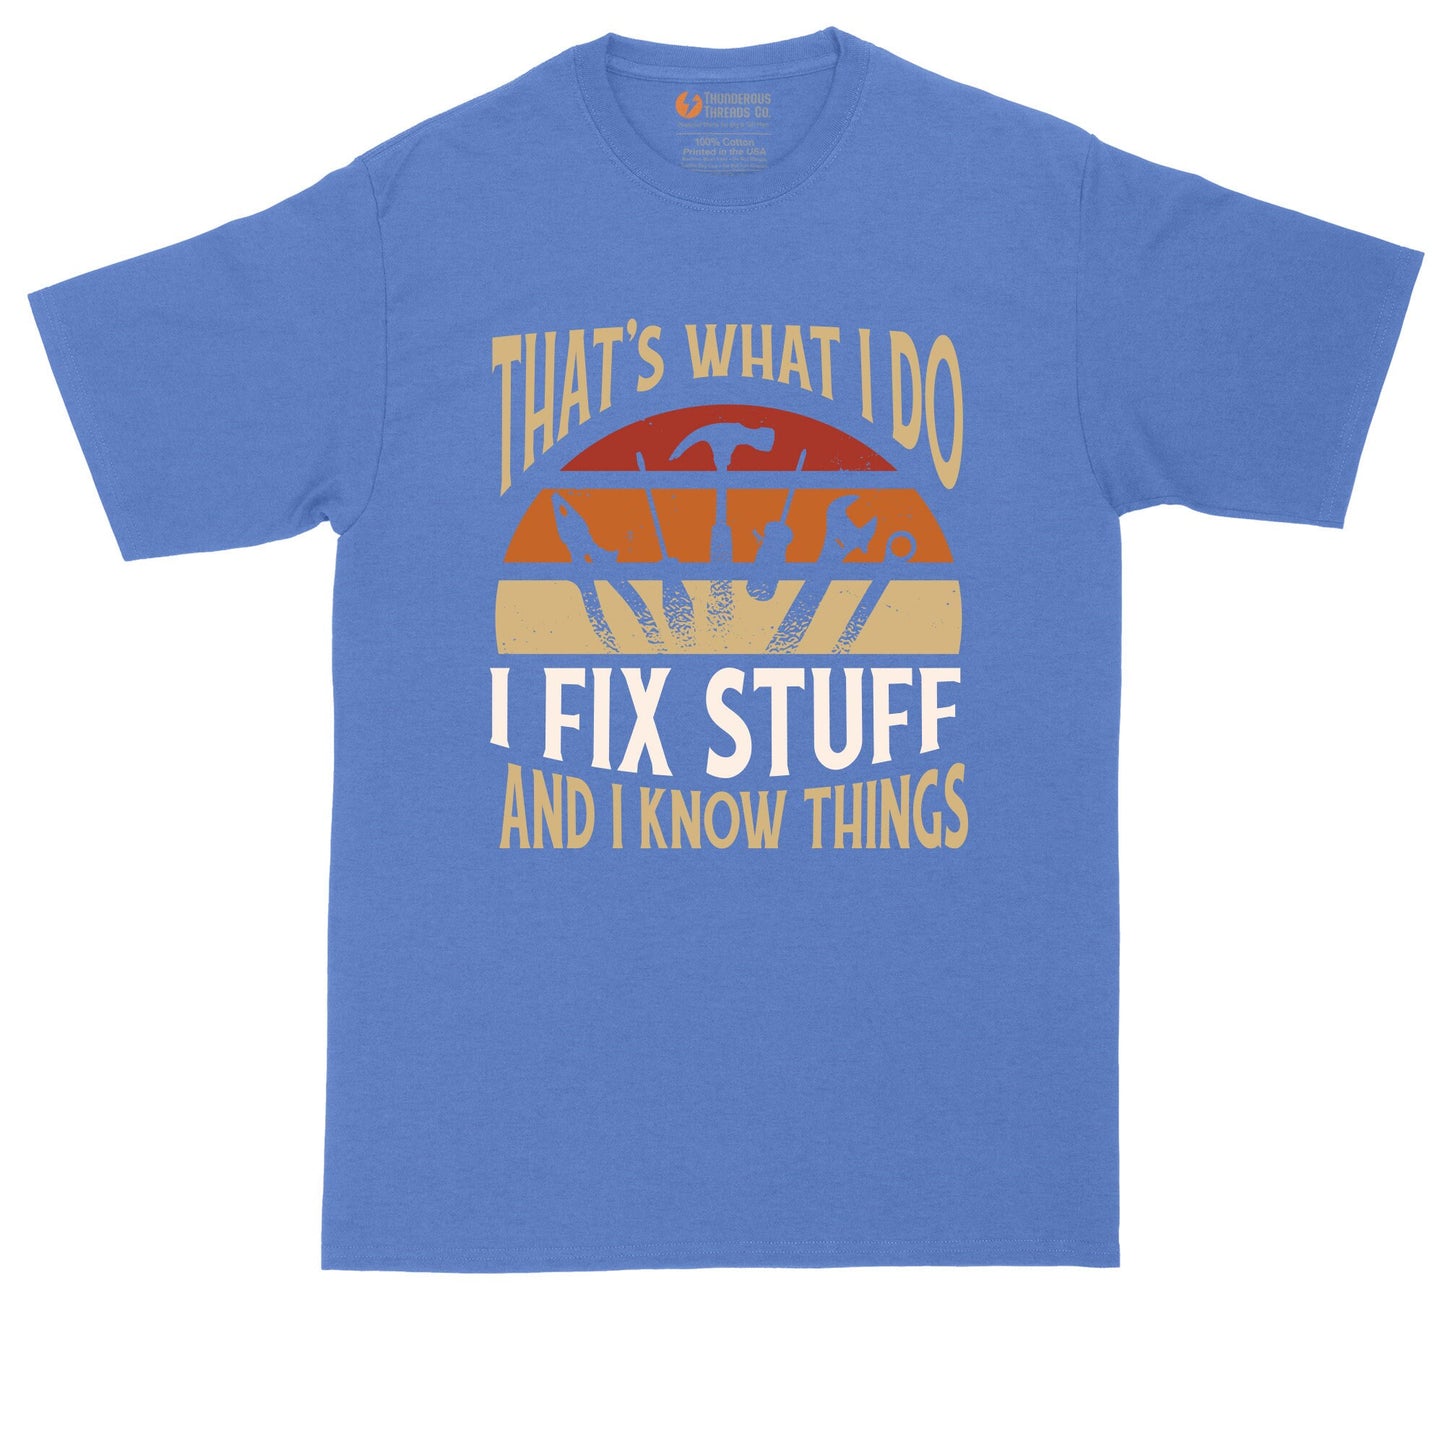 I Fix Stuff and I Know Things | Mens Big and Tall T-Shirt | Funny Mens T-Shirt | Handyman Shirt | Gift for Dad